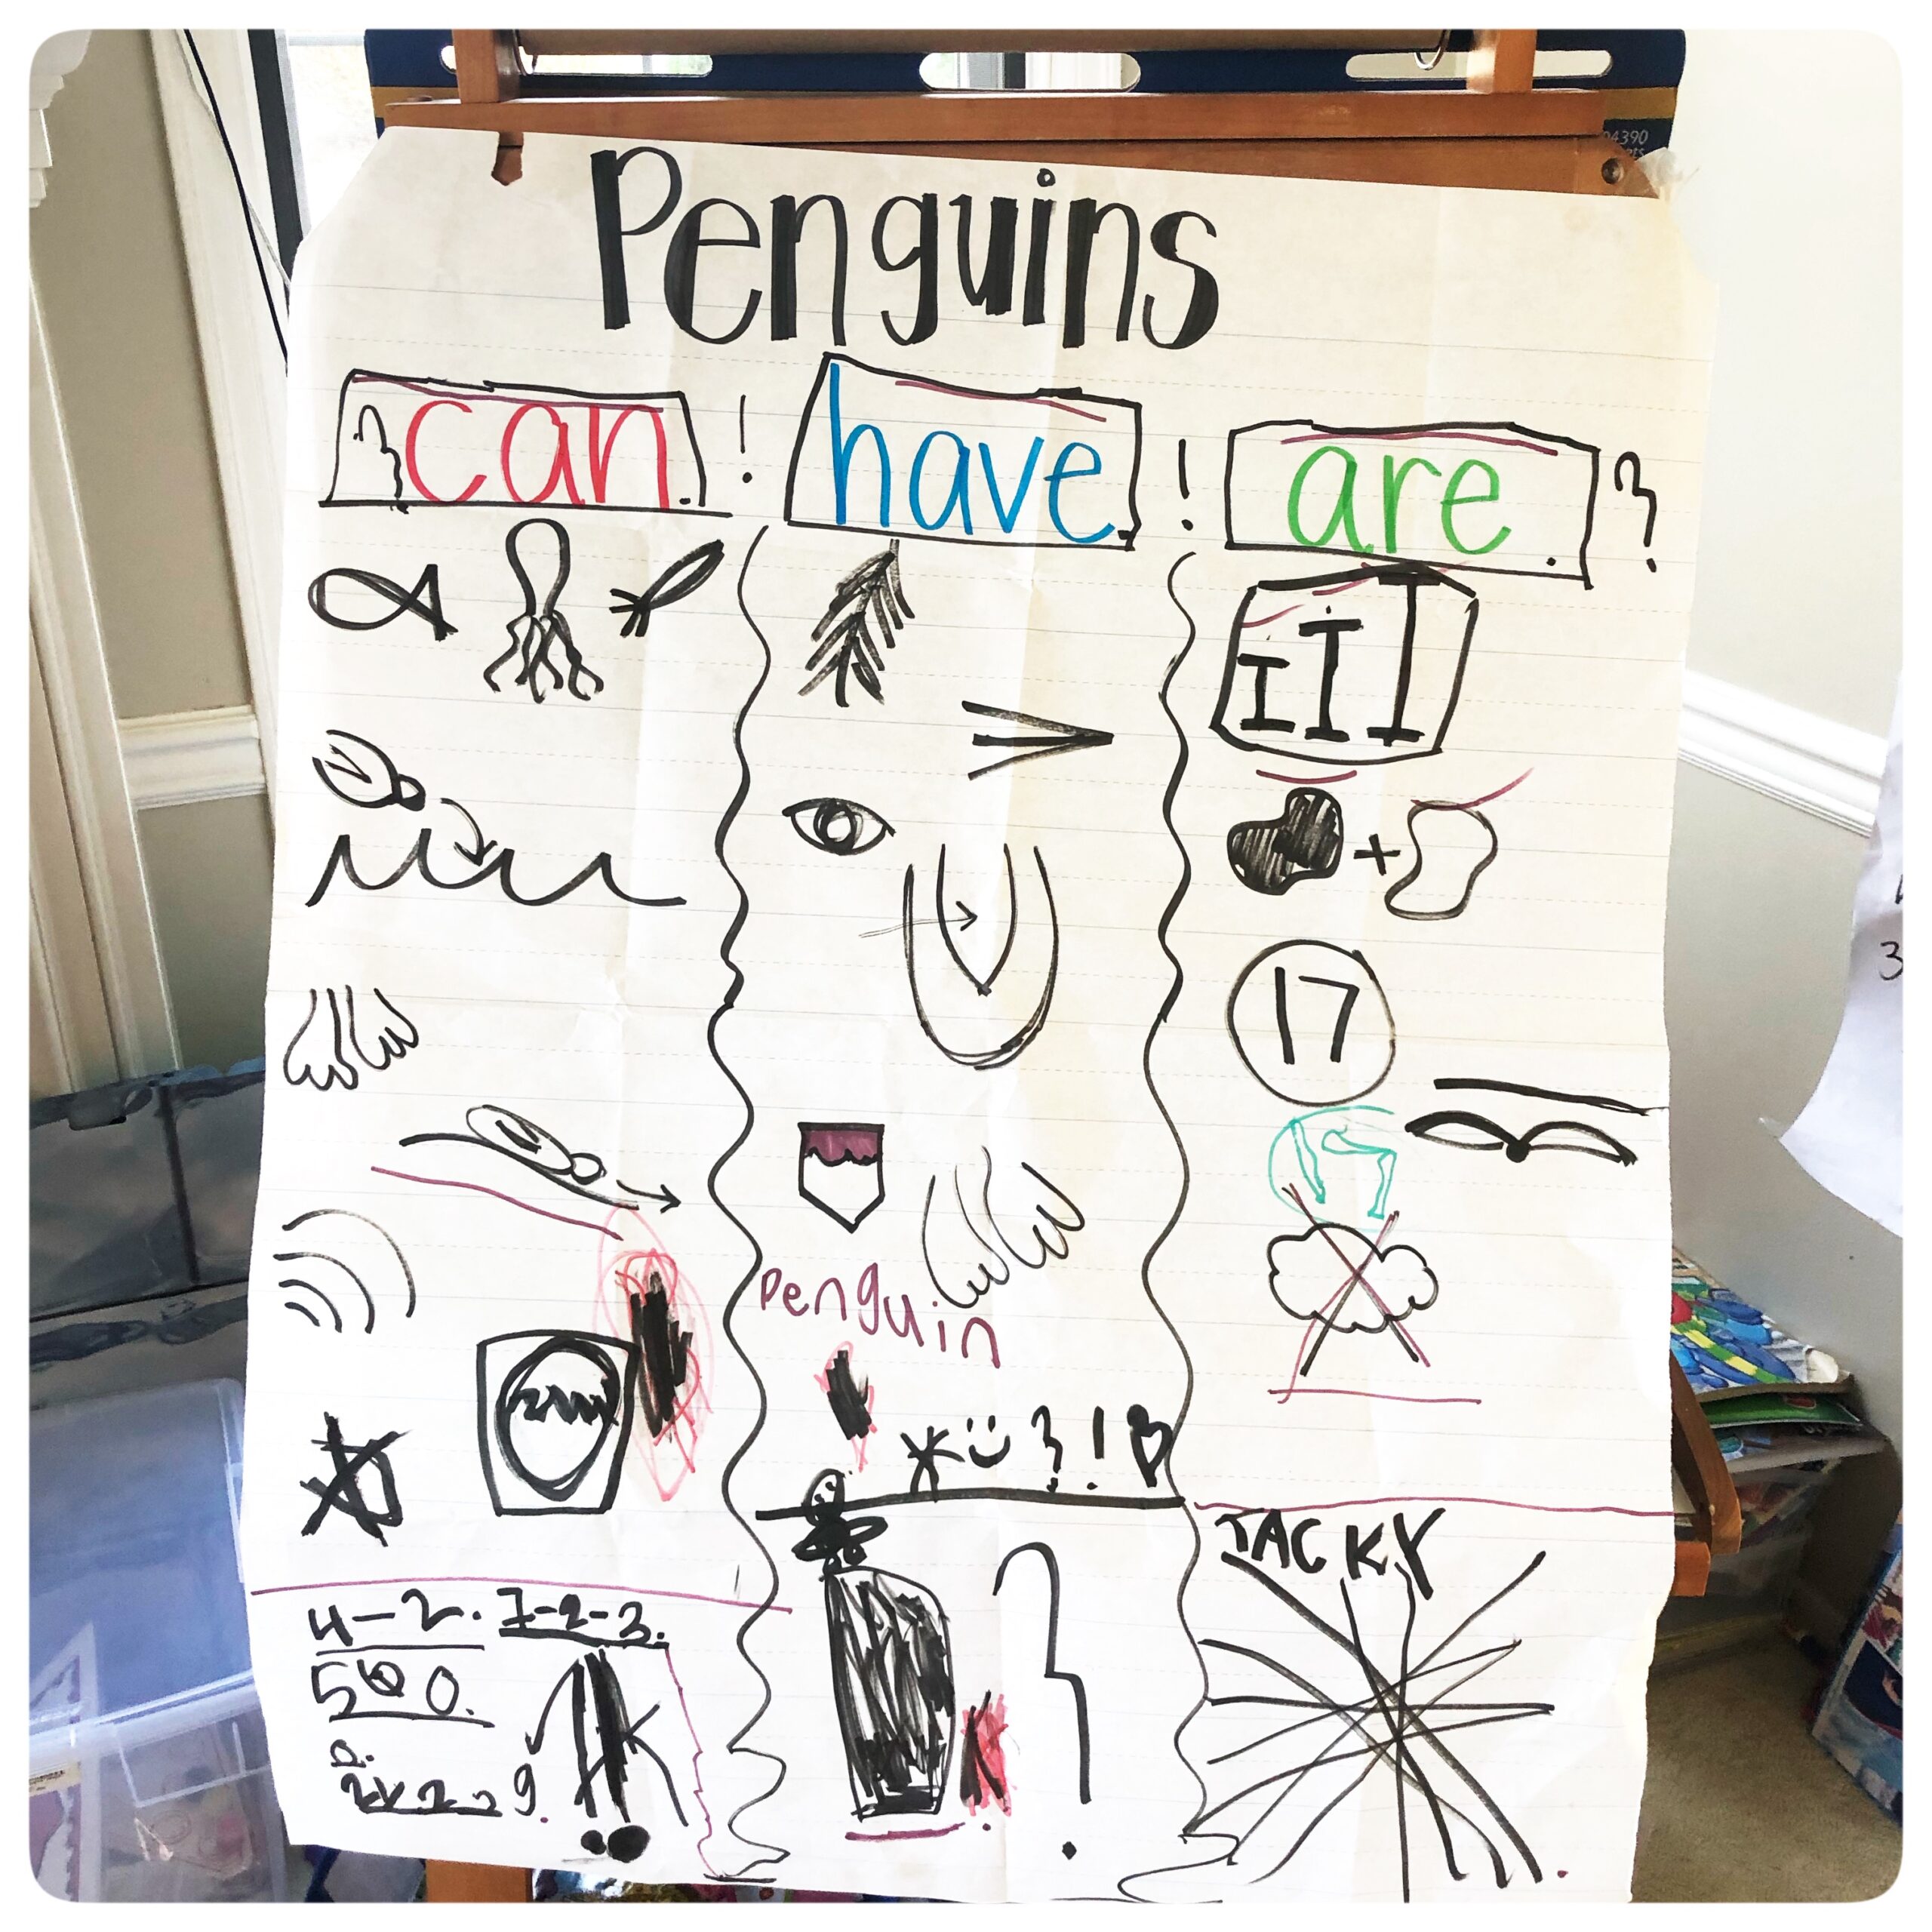 P is for Penguin.  Welcome to learning fun and creative ways to teach children letters of the alphabet, including sign language, arts and crafts, sensory bins, sensory trays, and literature.  